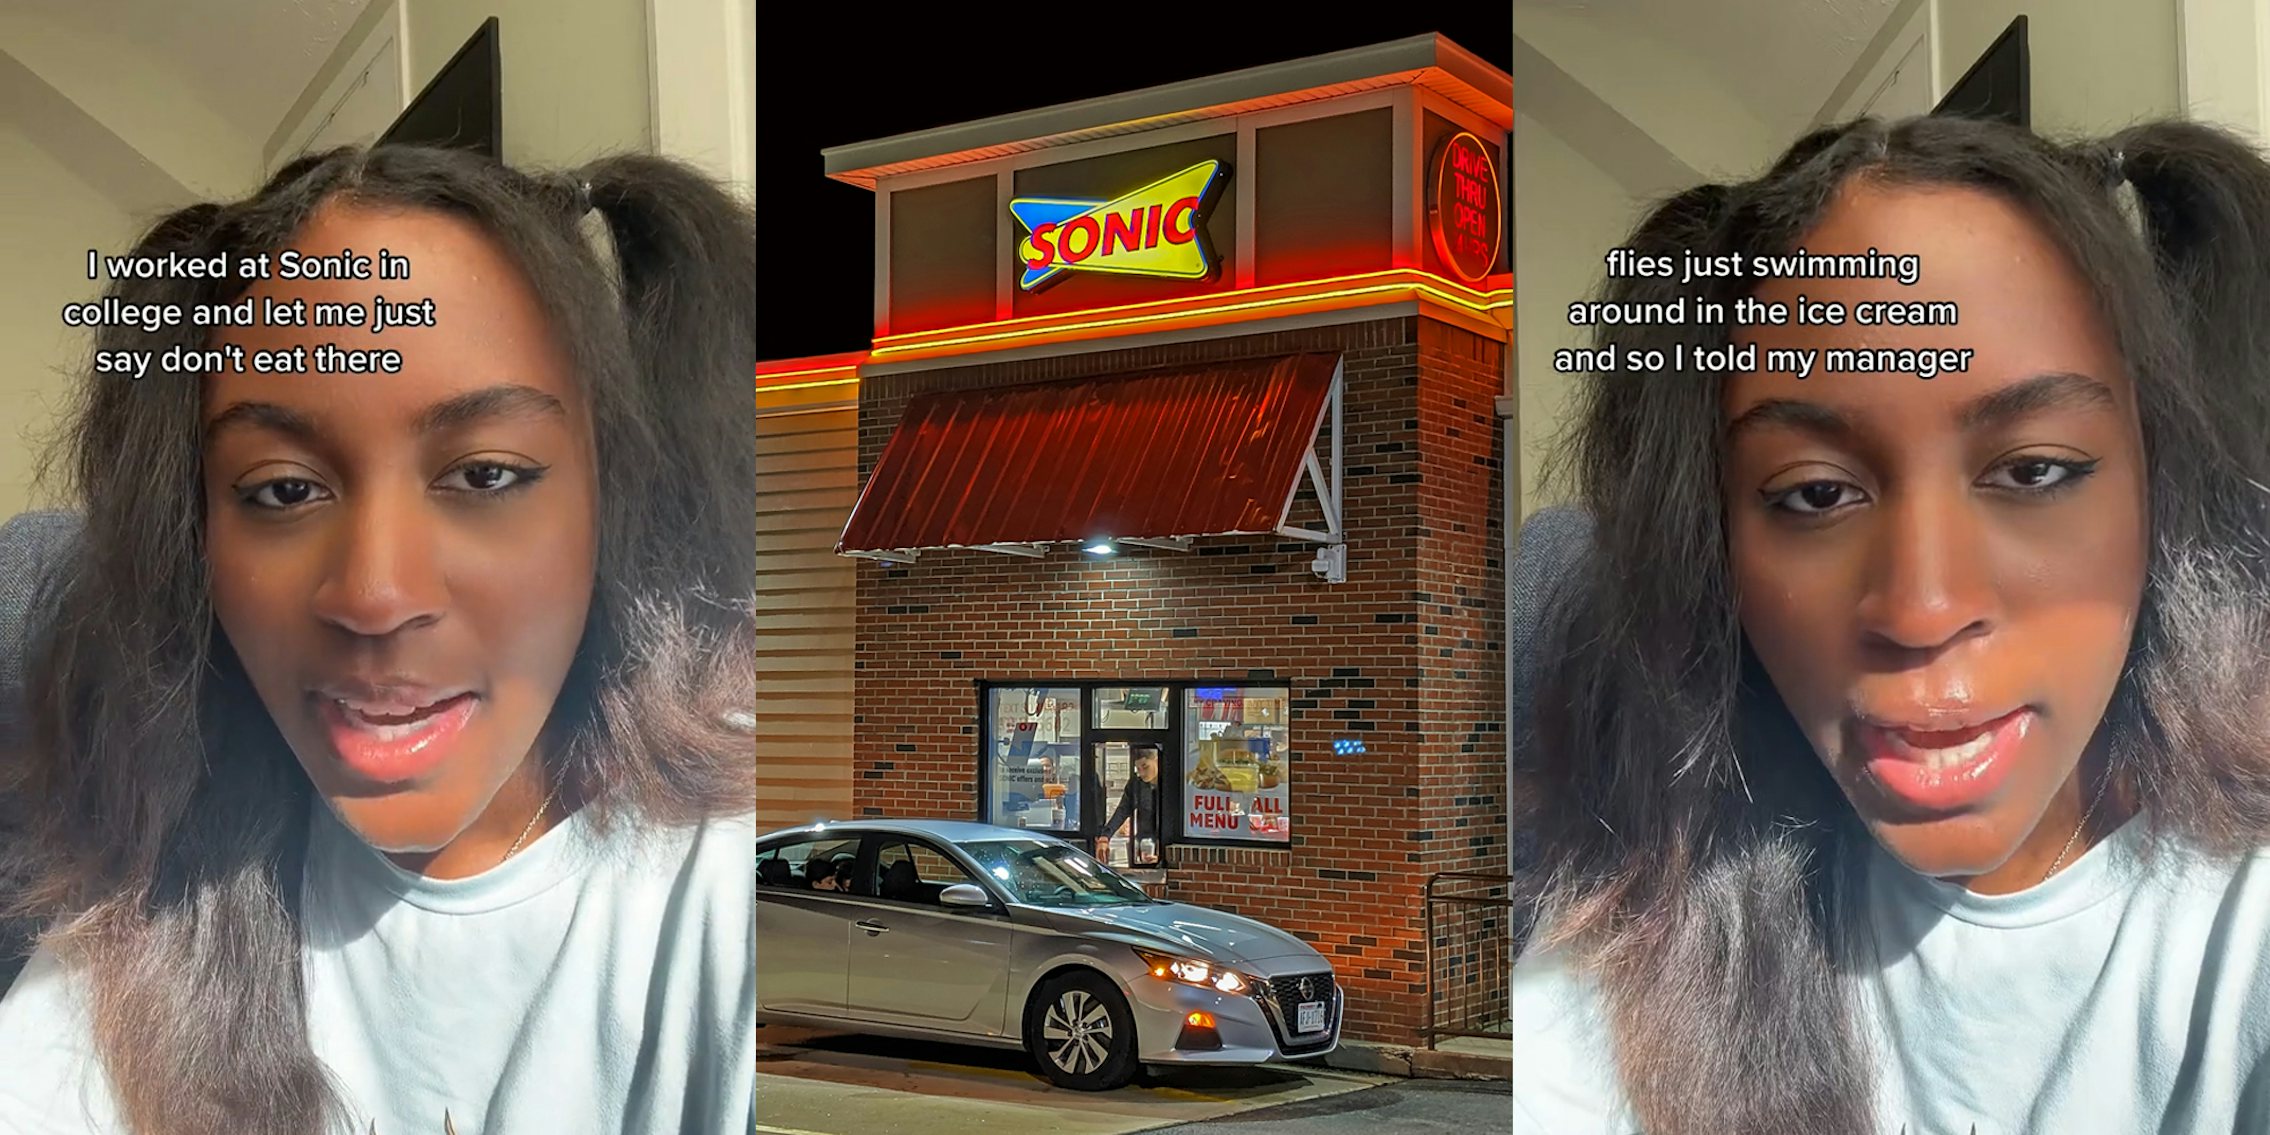 former Sonic employee speaking caption 'I worked at Sonic in college and let me just say don't eat there' (l) Sonic drive thru at night (c) former Sonic employee speaking caption 'flies just swimming around in the ice cream and so I told my manager' (r)